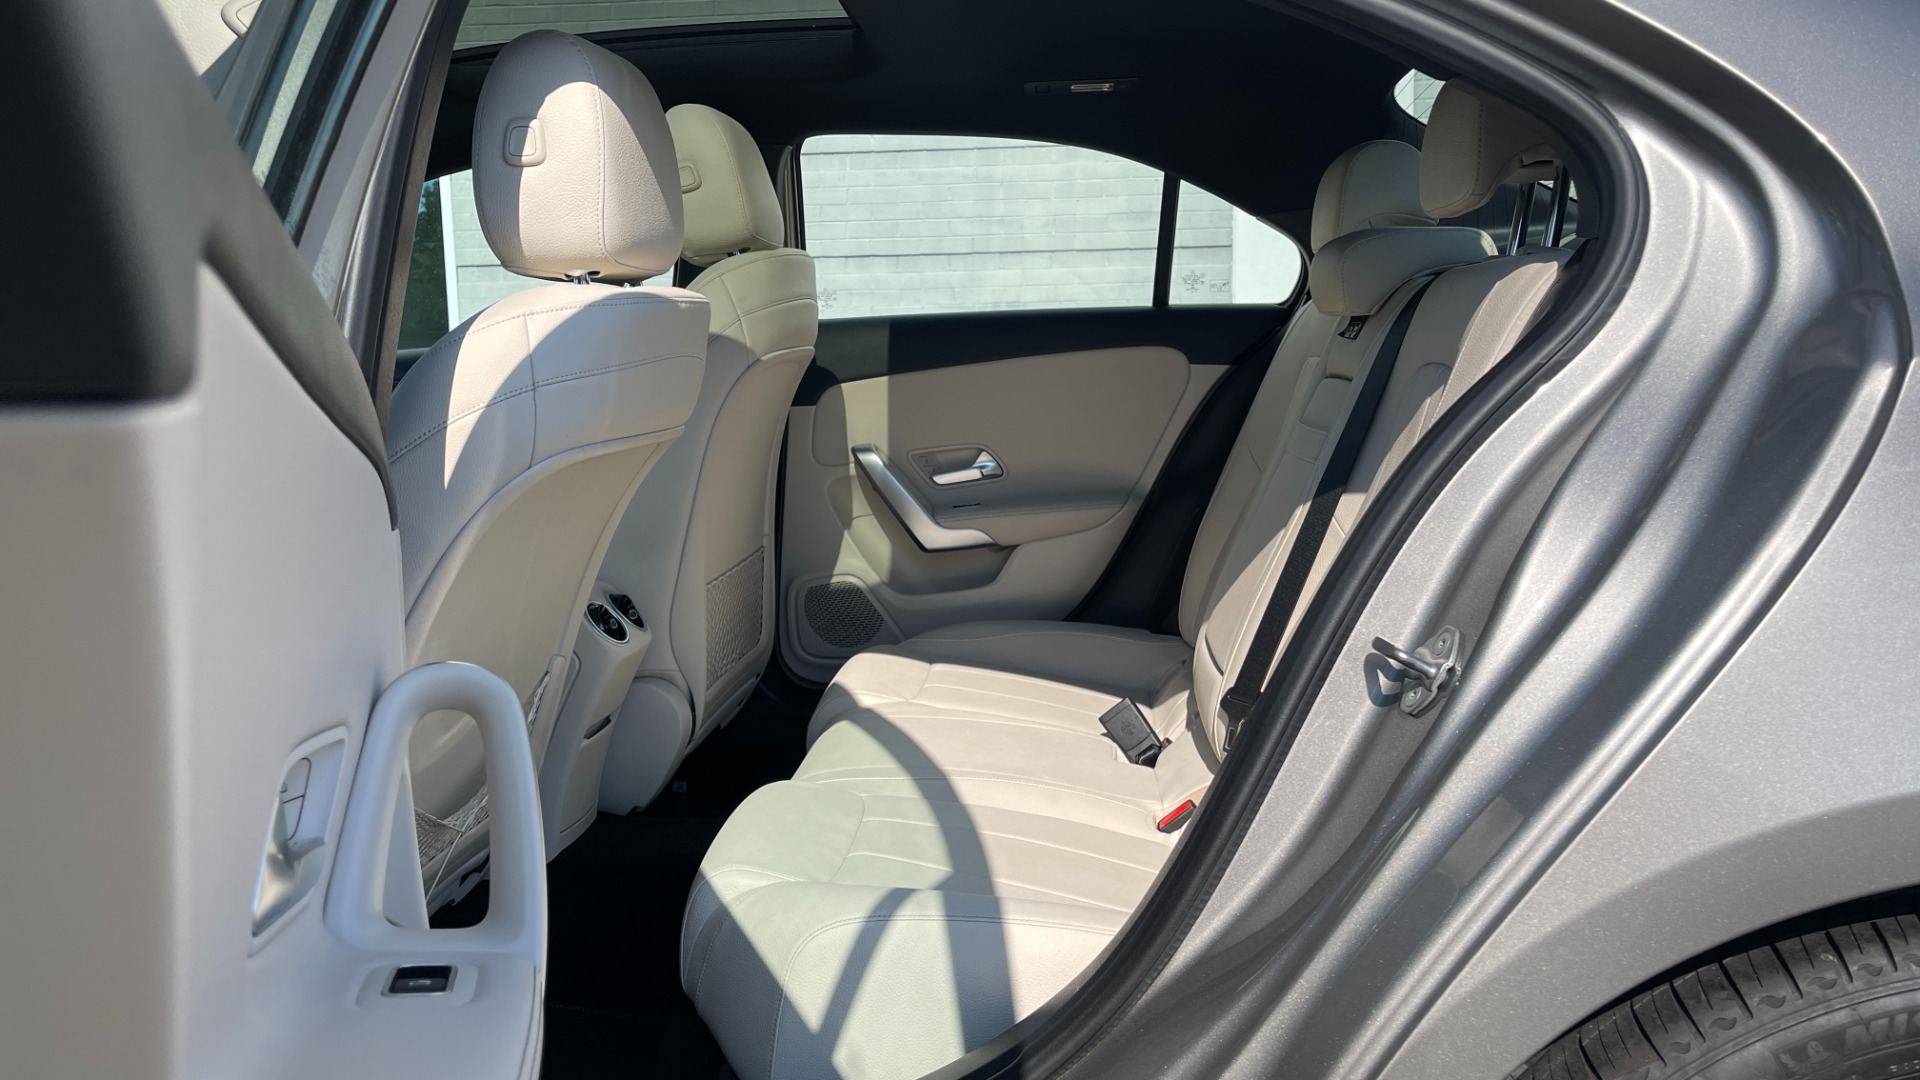 Used 2019 Mercedes-Benz A-Class A220 / PREMIUM / AMBIENT LIGHTING / BLIND SPOT / WIRELESS CHARGING for sale $30,599 at Formula Imports in Charlotte NC 28227 14